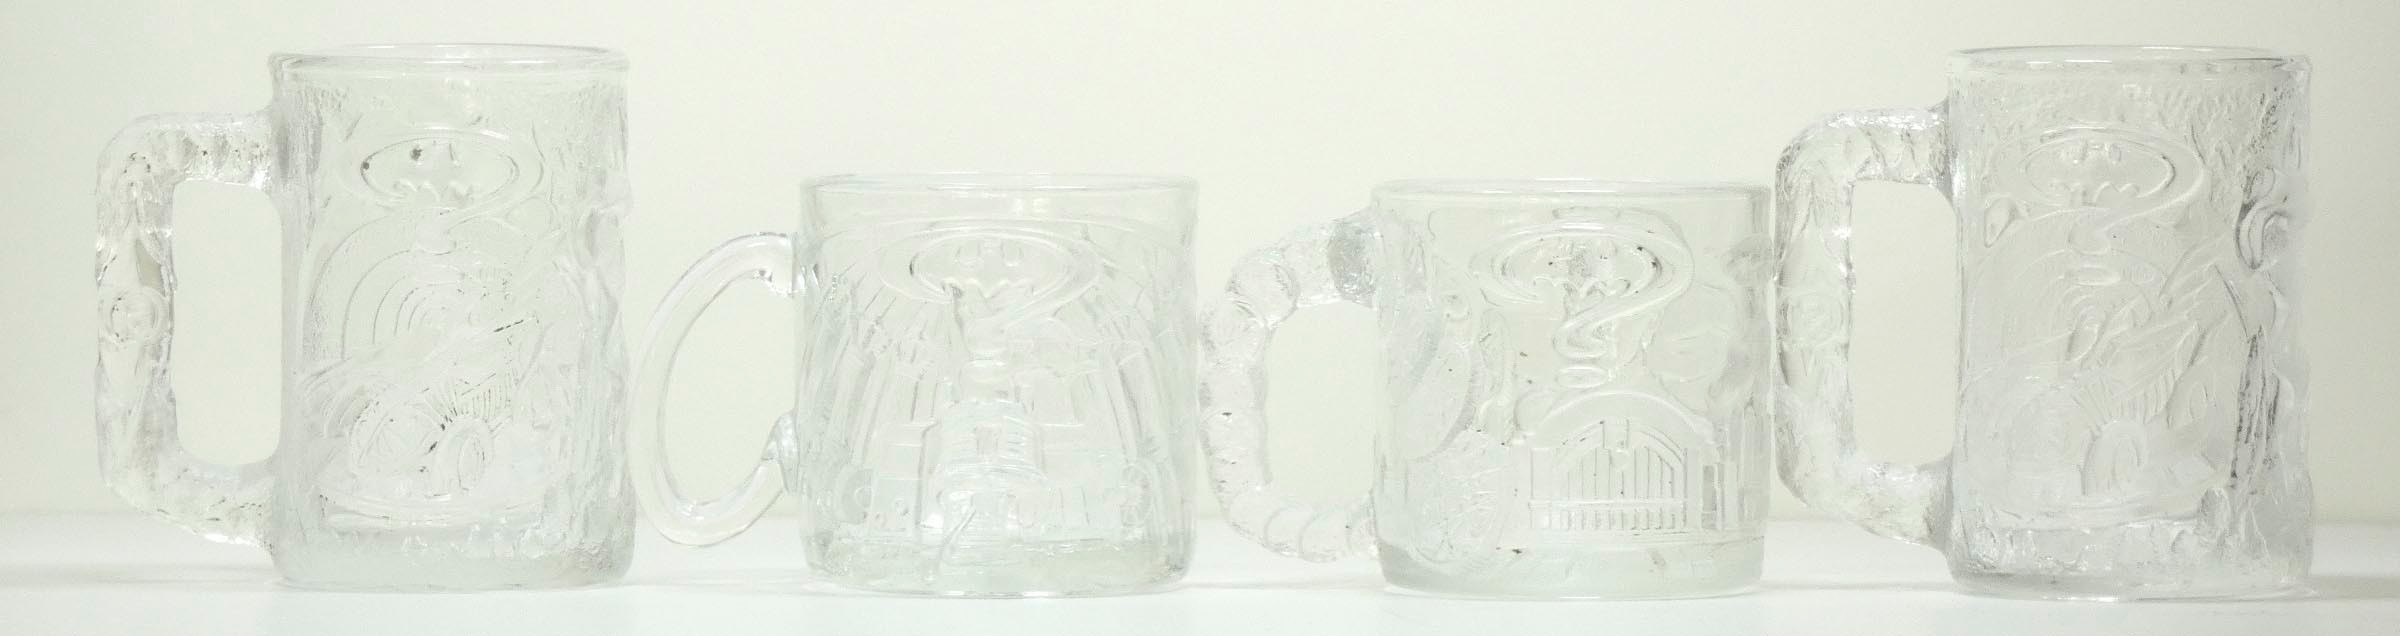 A set of four Batman Forever (1995) glass mugs, available to purchase from McDonalds stores to